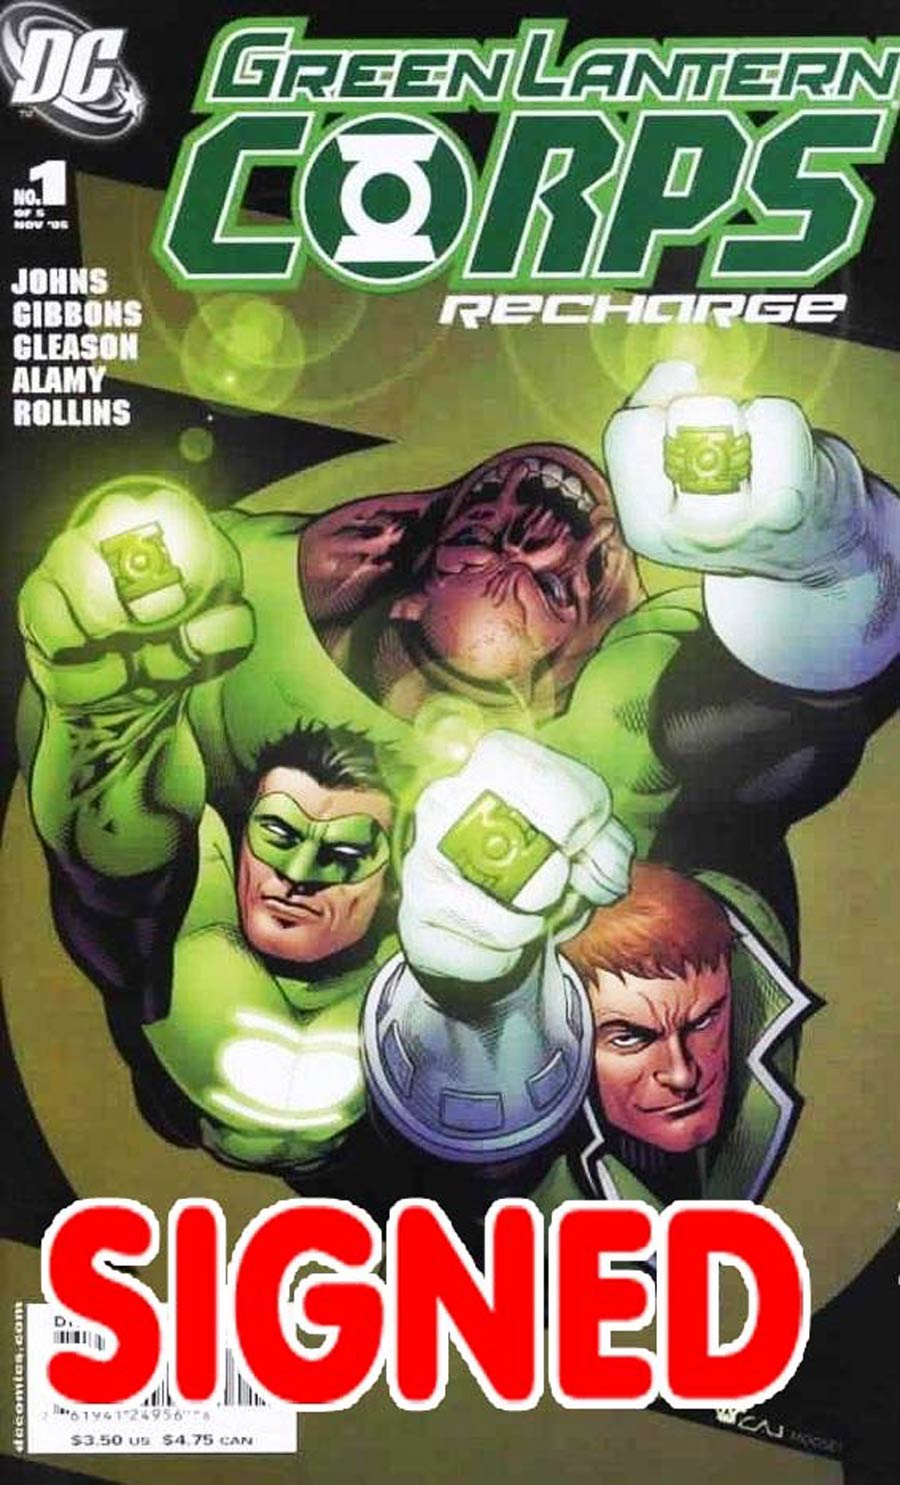 Green Lantern Corps Recharge #1 Cover B DF Signed By Dave Gibbons